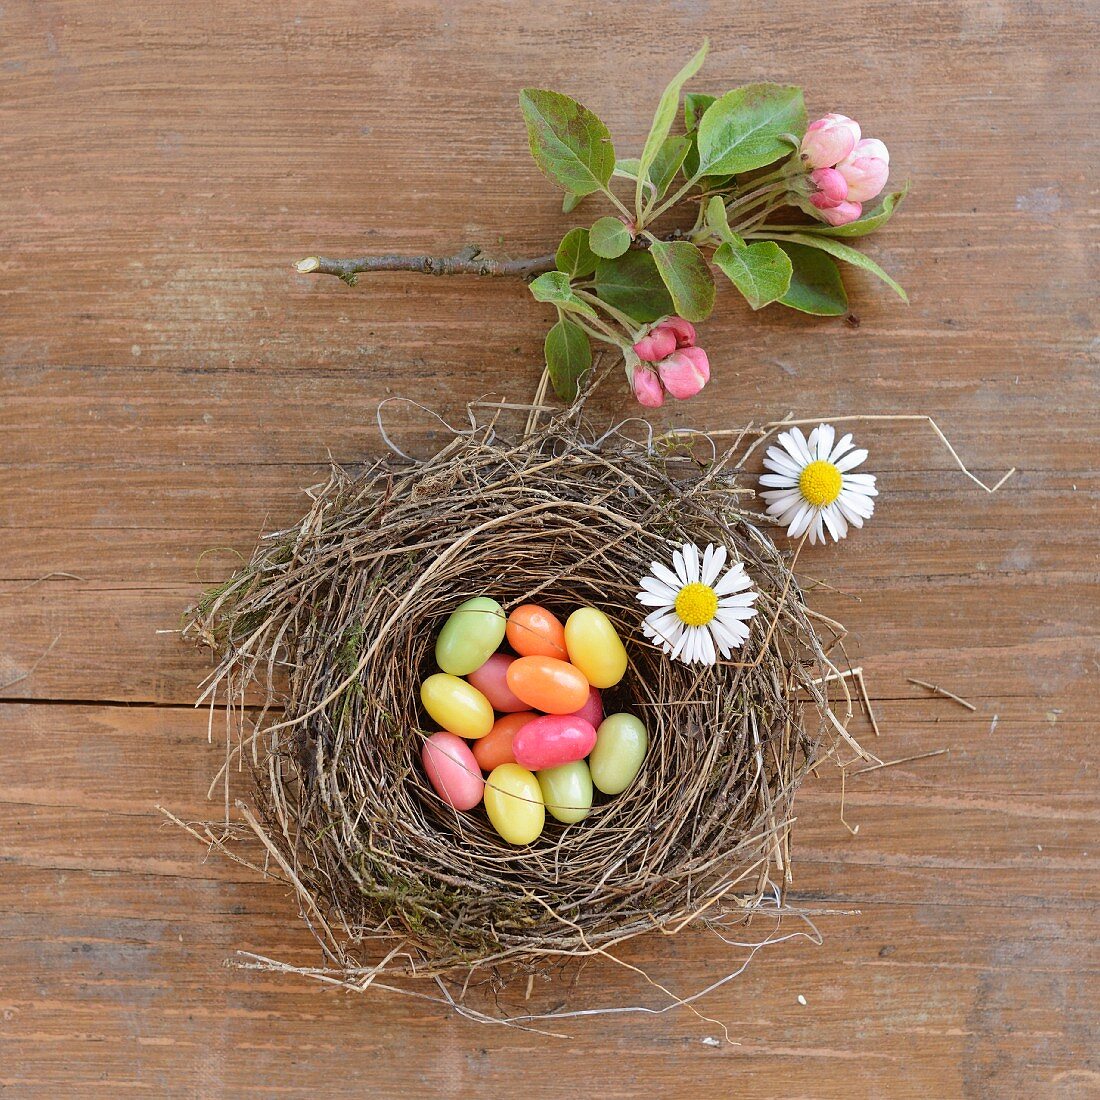 Jelly beans in an Easter nest